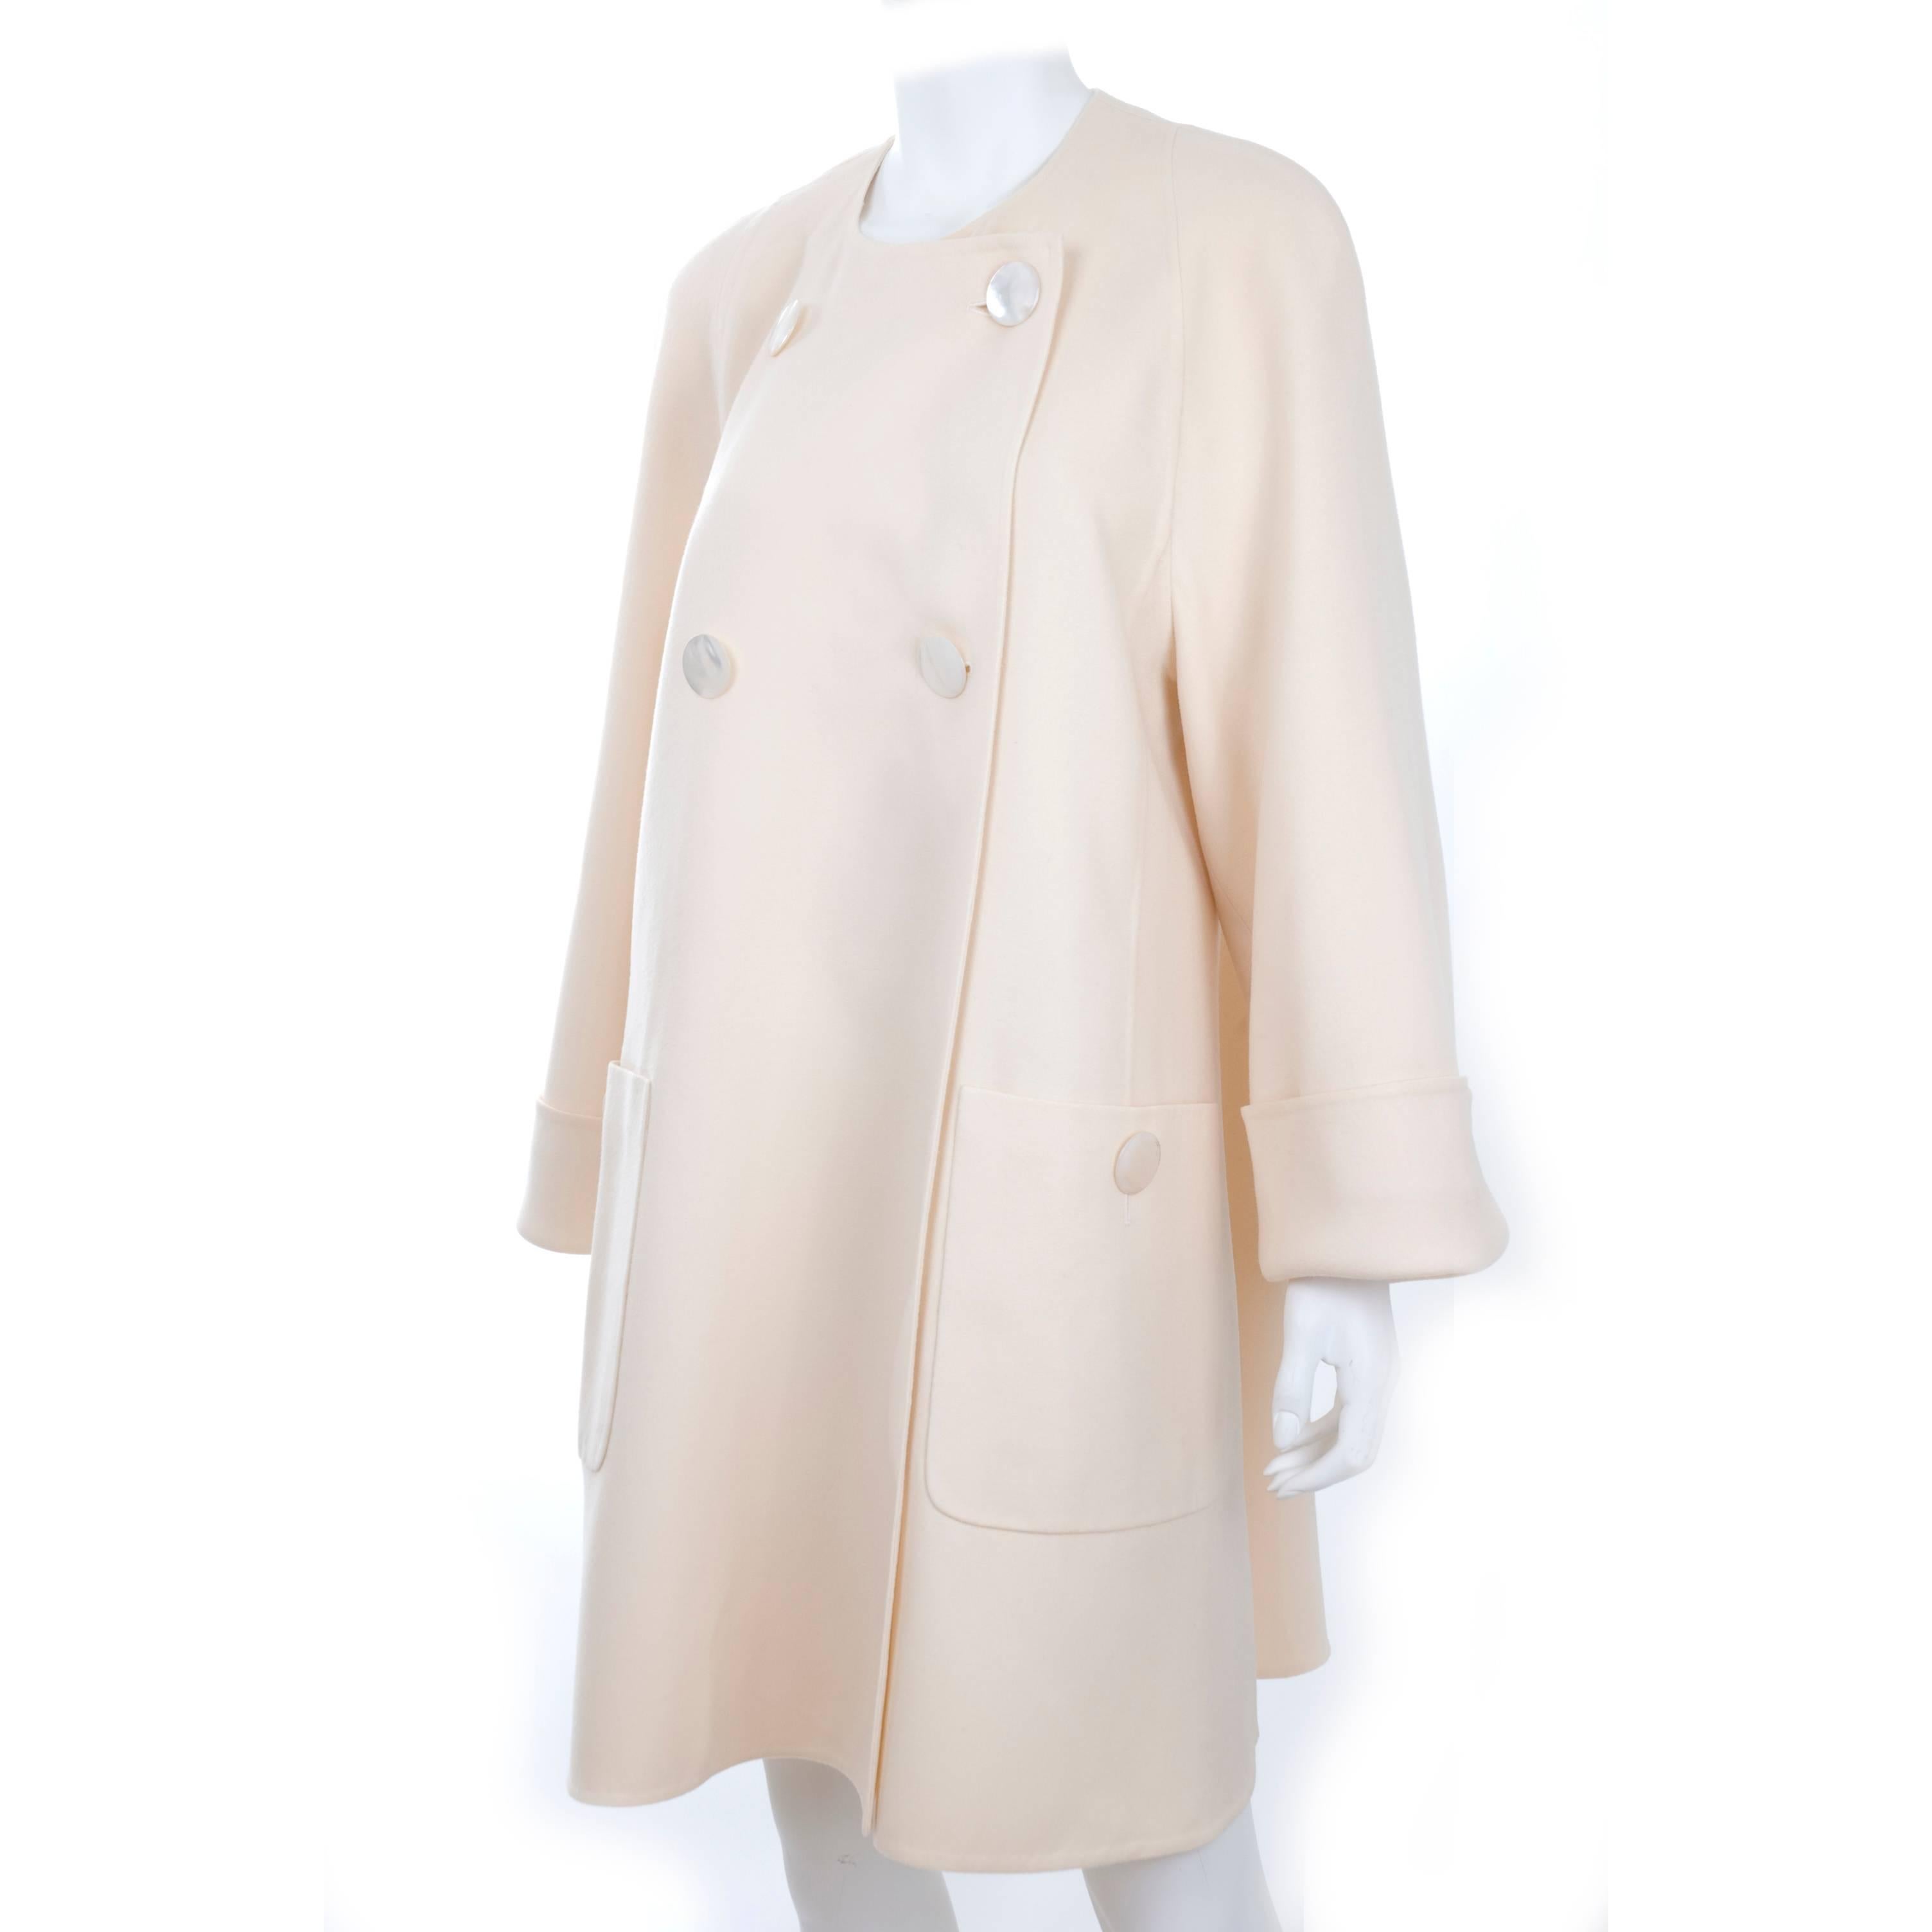 90s Vintage AKRIS double face wool coat in creme. 
Wide a-line shape and large mother of pearl buttons.
The coat is clean no spots or else. Very good condition.
Size US 10
Measurements:
Length 36.5 inches